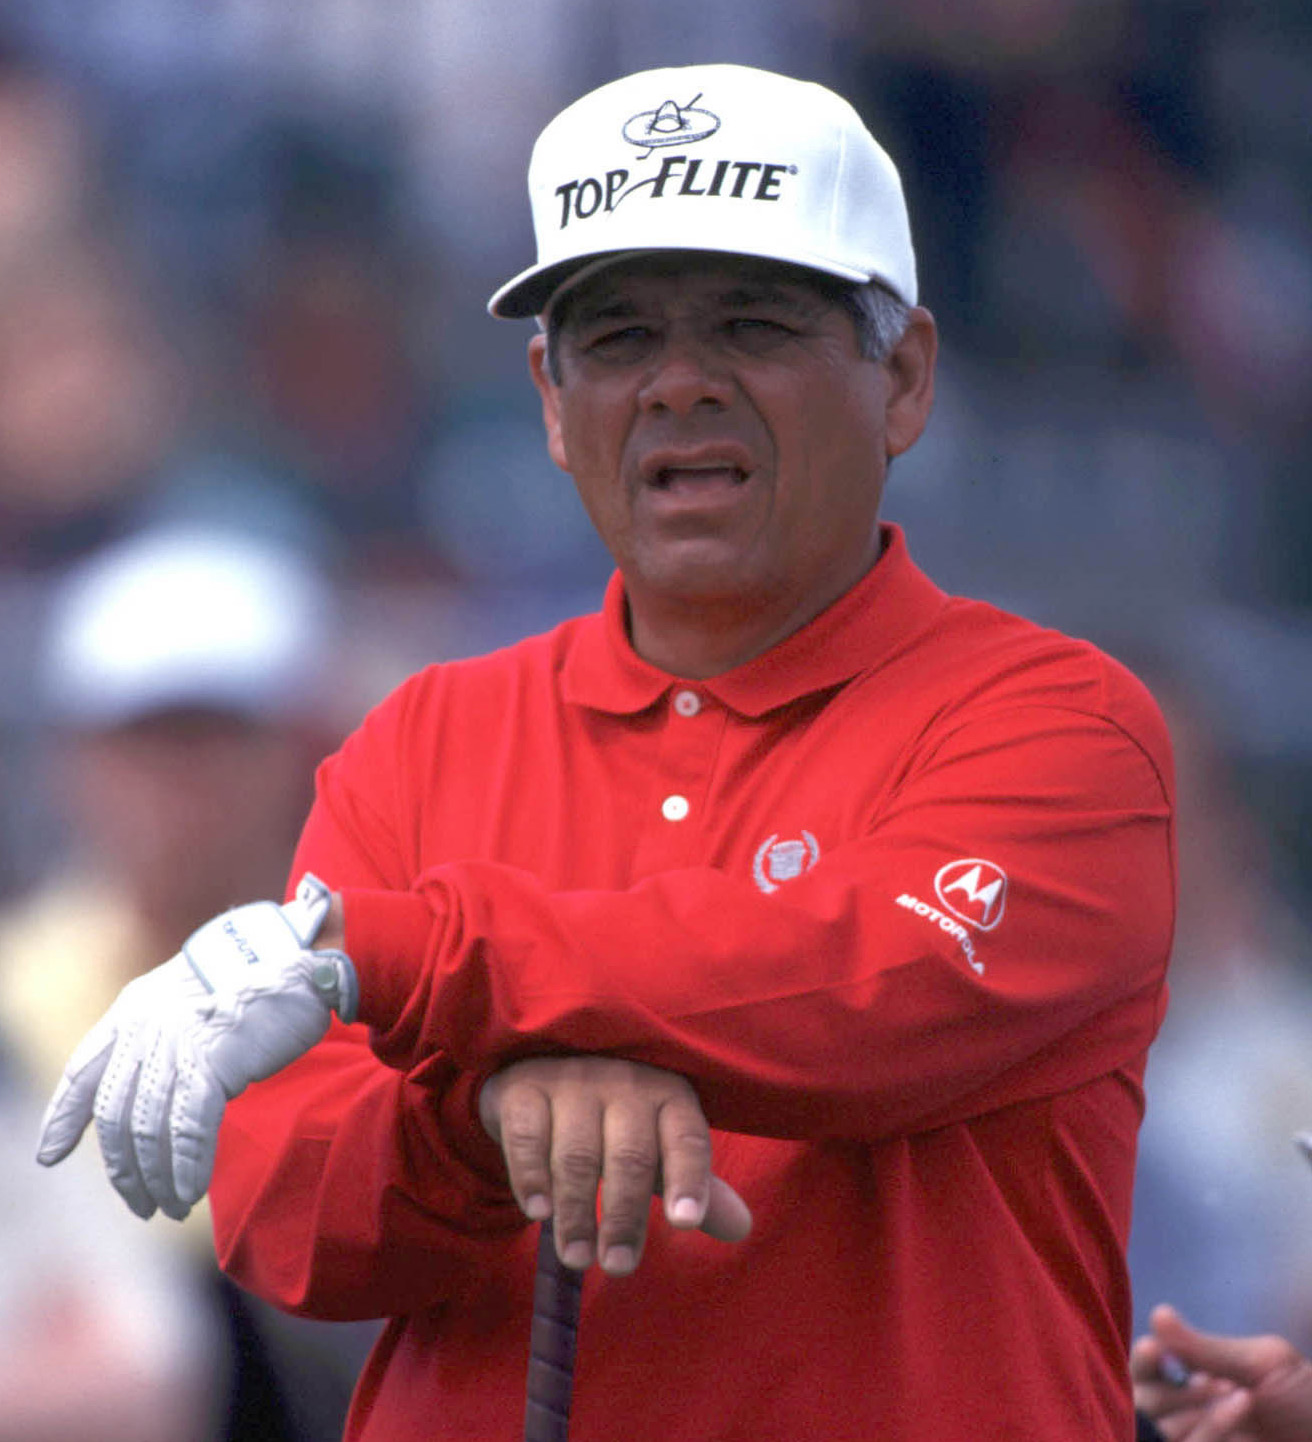 Lee Trevino: six-time Major champion and Happy Gilmore cameo-extraordinaire